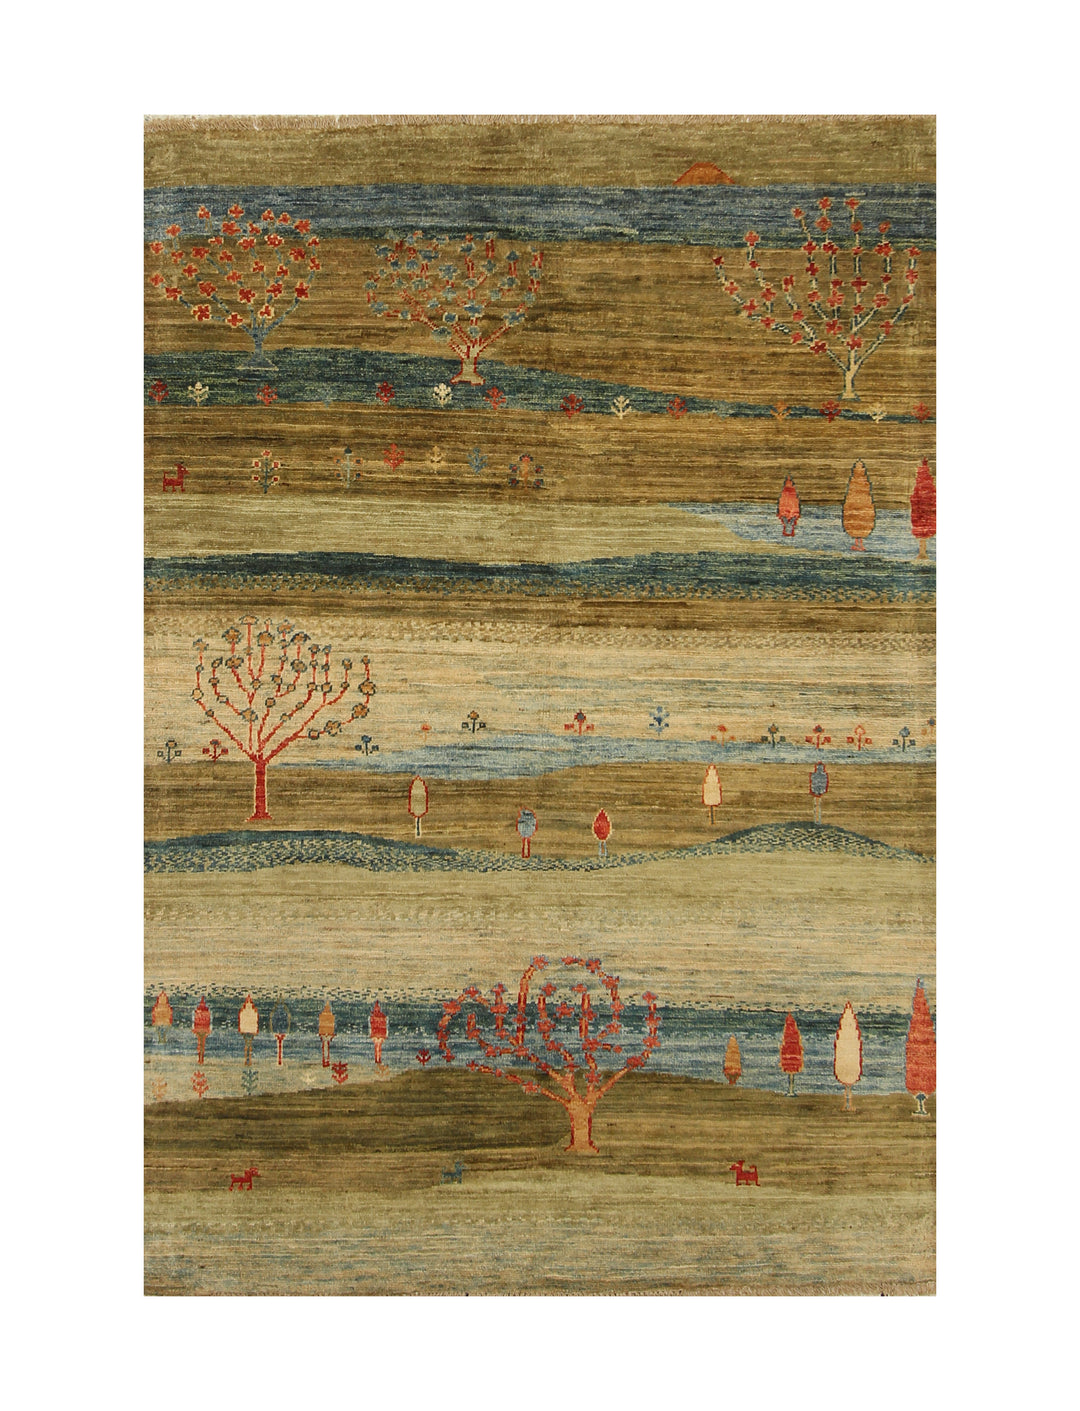 SOLD 4x6 Green Gabbeh Landscape Afghan Hand knotted Rug